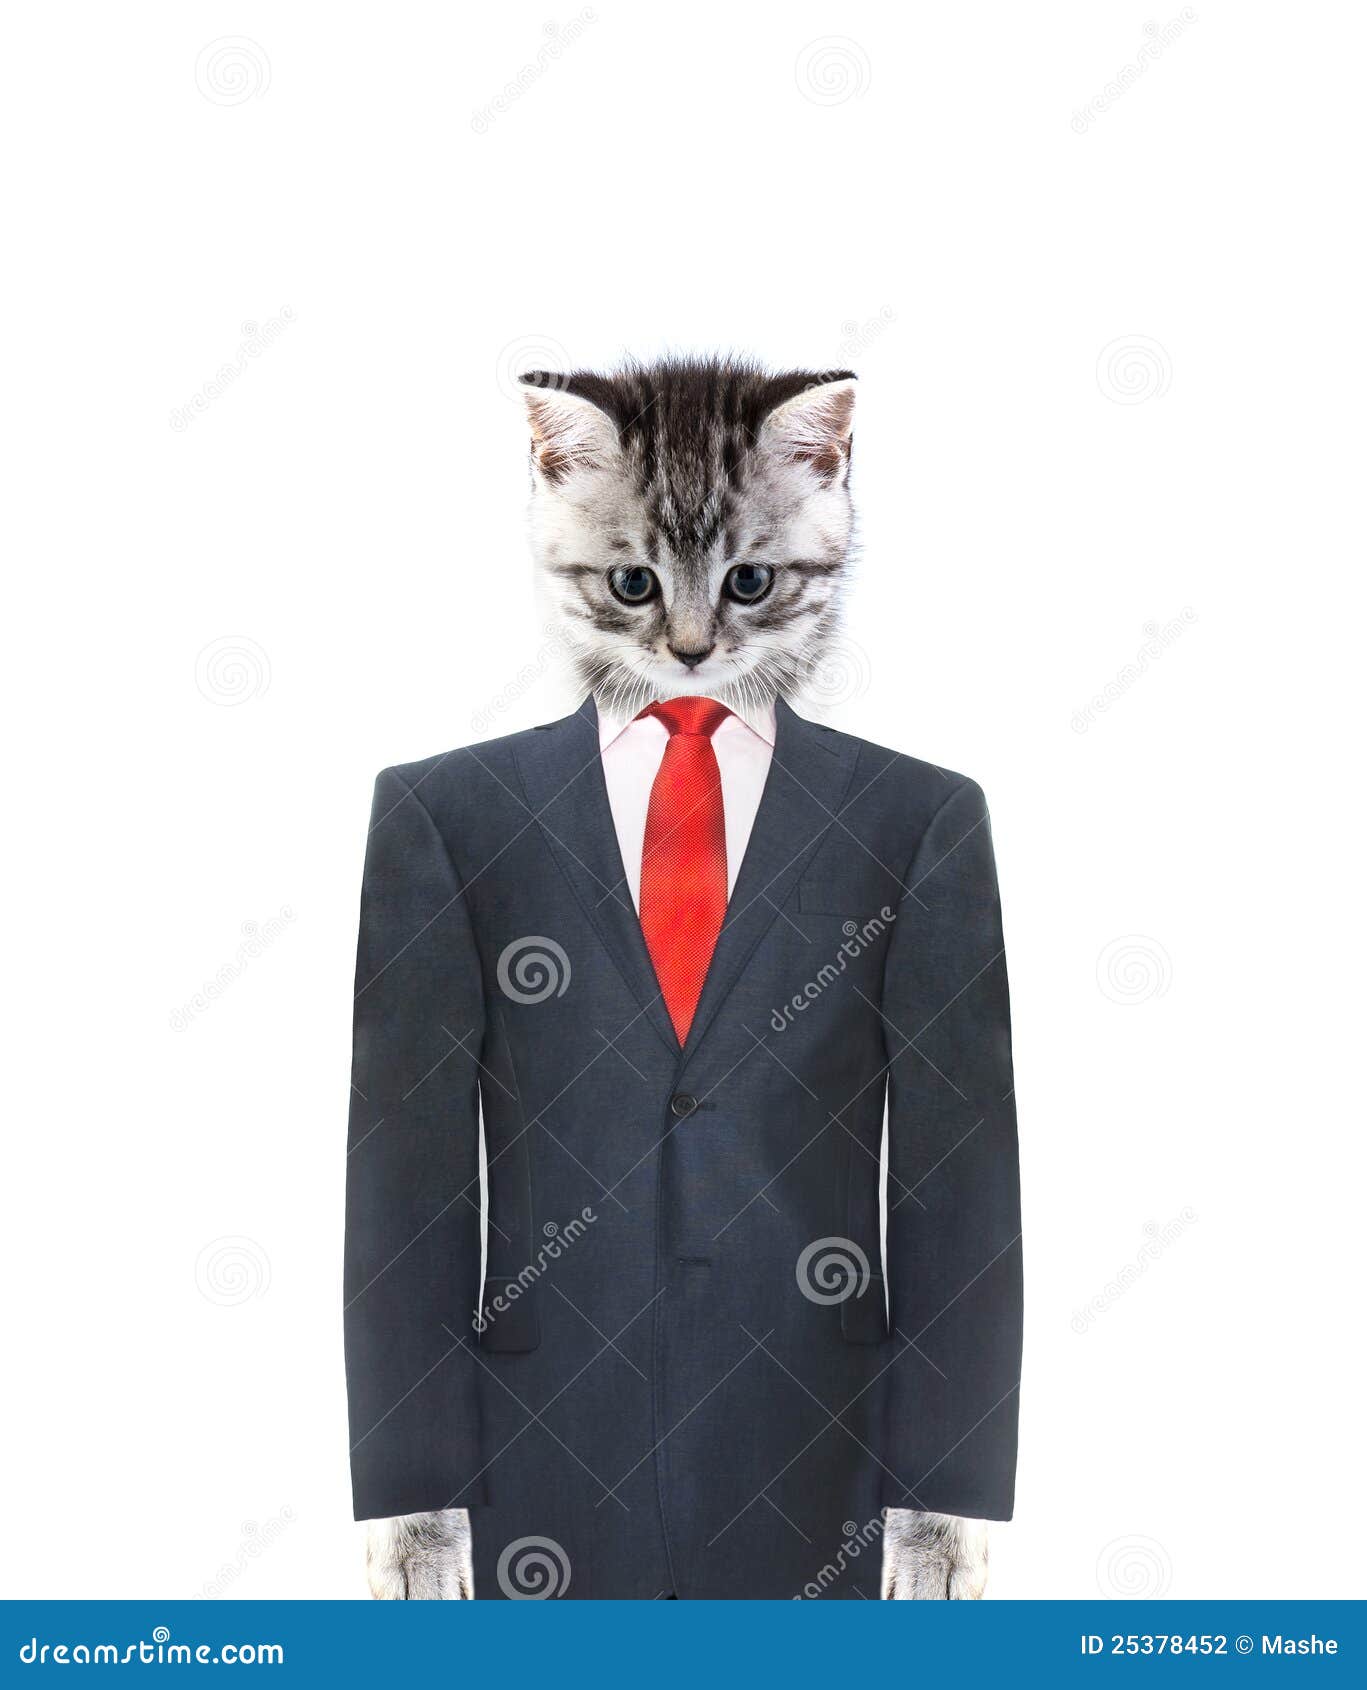 a cat wearing a coat and a collar with a striped shirt on it's